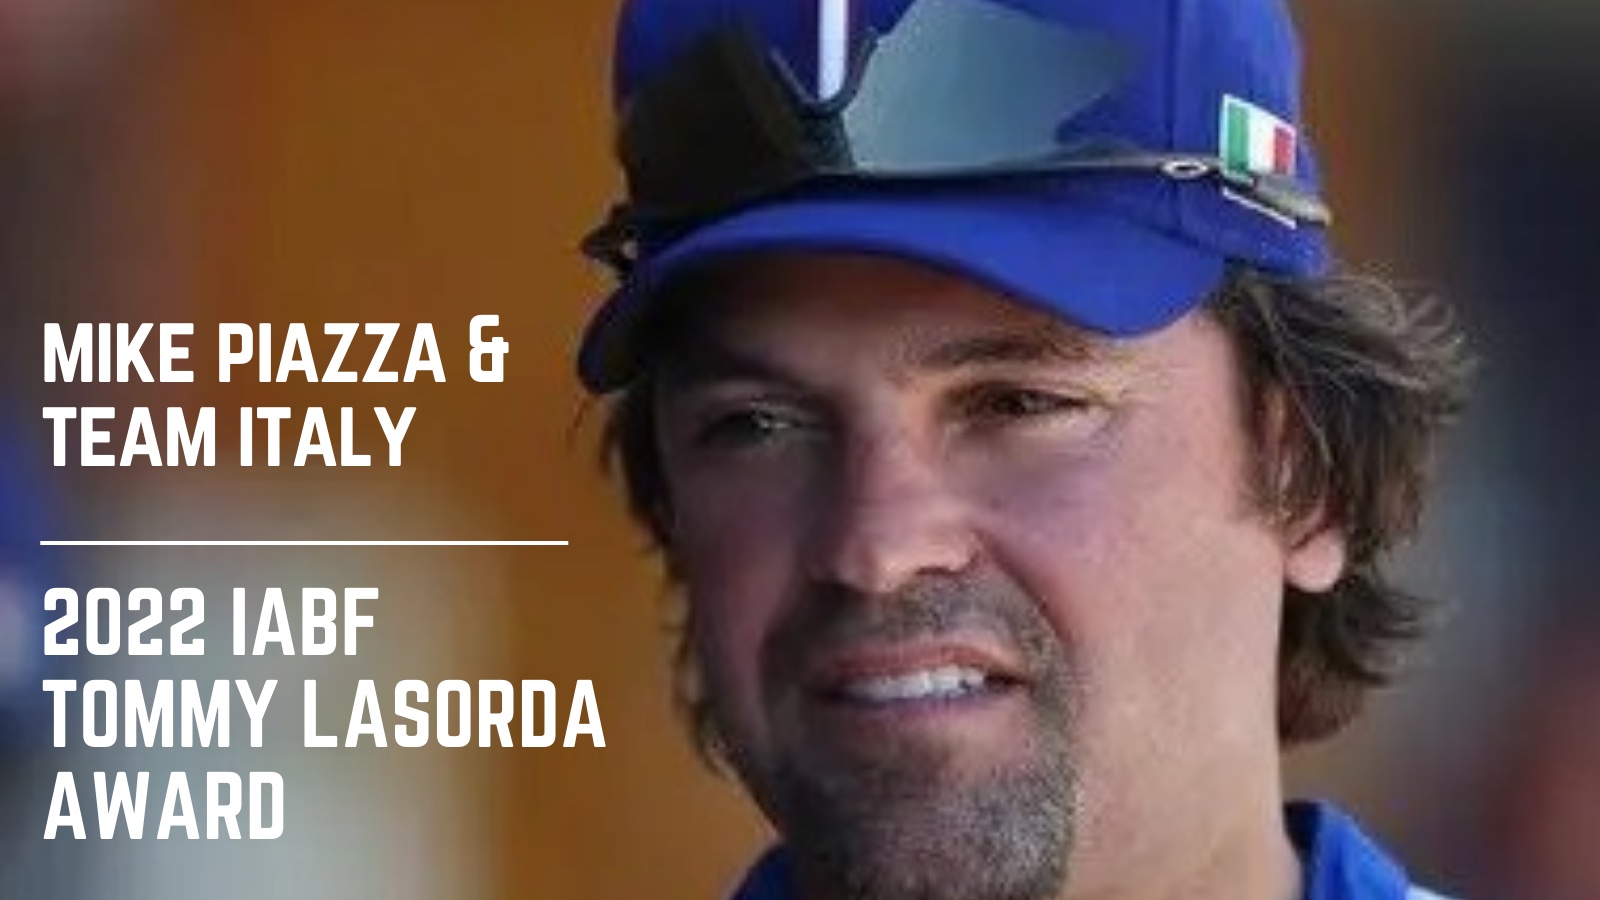 Mike Piazza presented as manager of Italy's baseball team